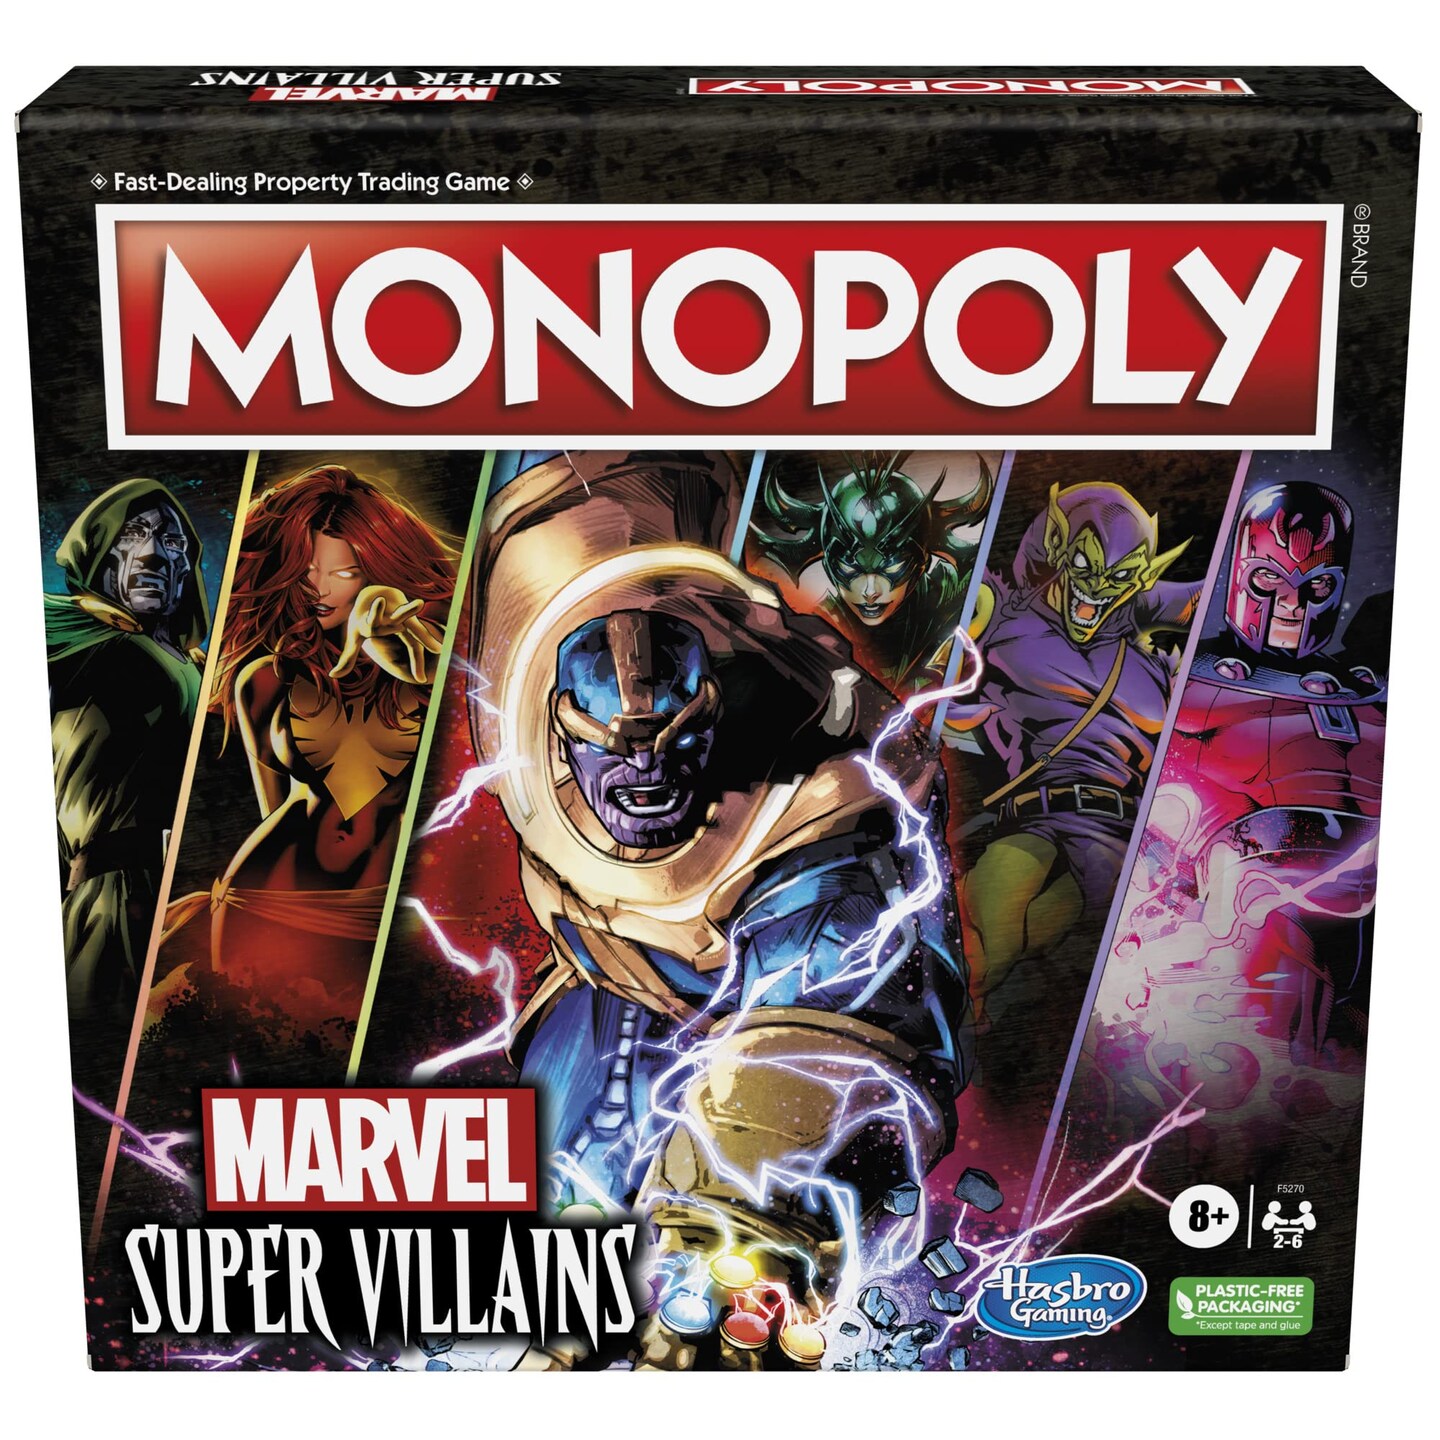 MONOPOLY: Marvel Super Villains Edition Board Game for Families and Kids Ages 8 and Up, Marvel Game for 2-6 Players